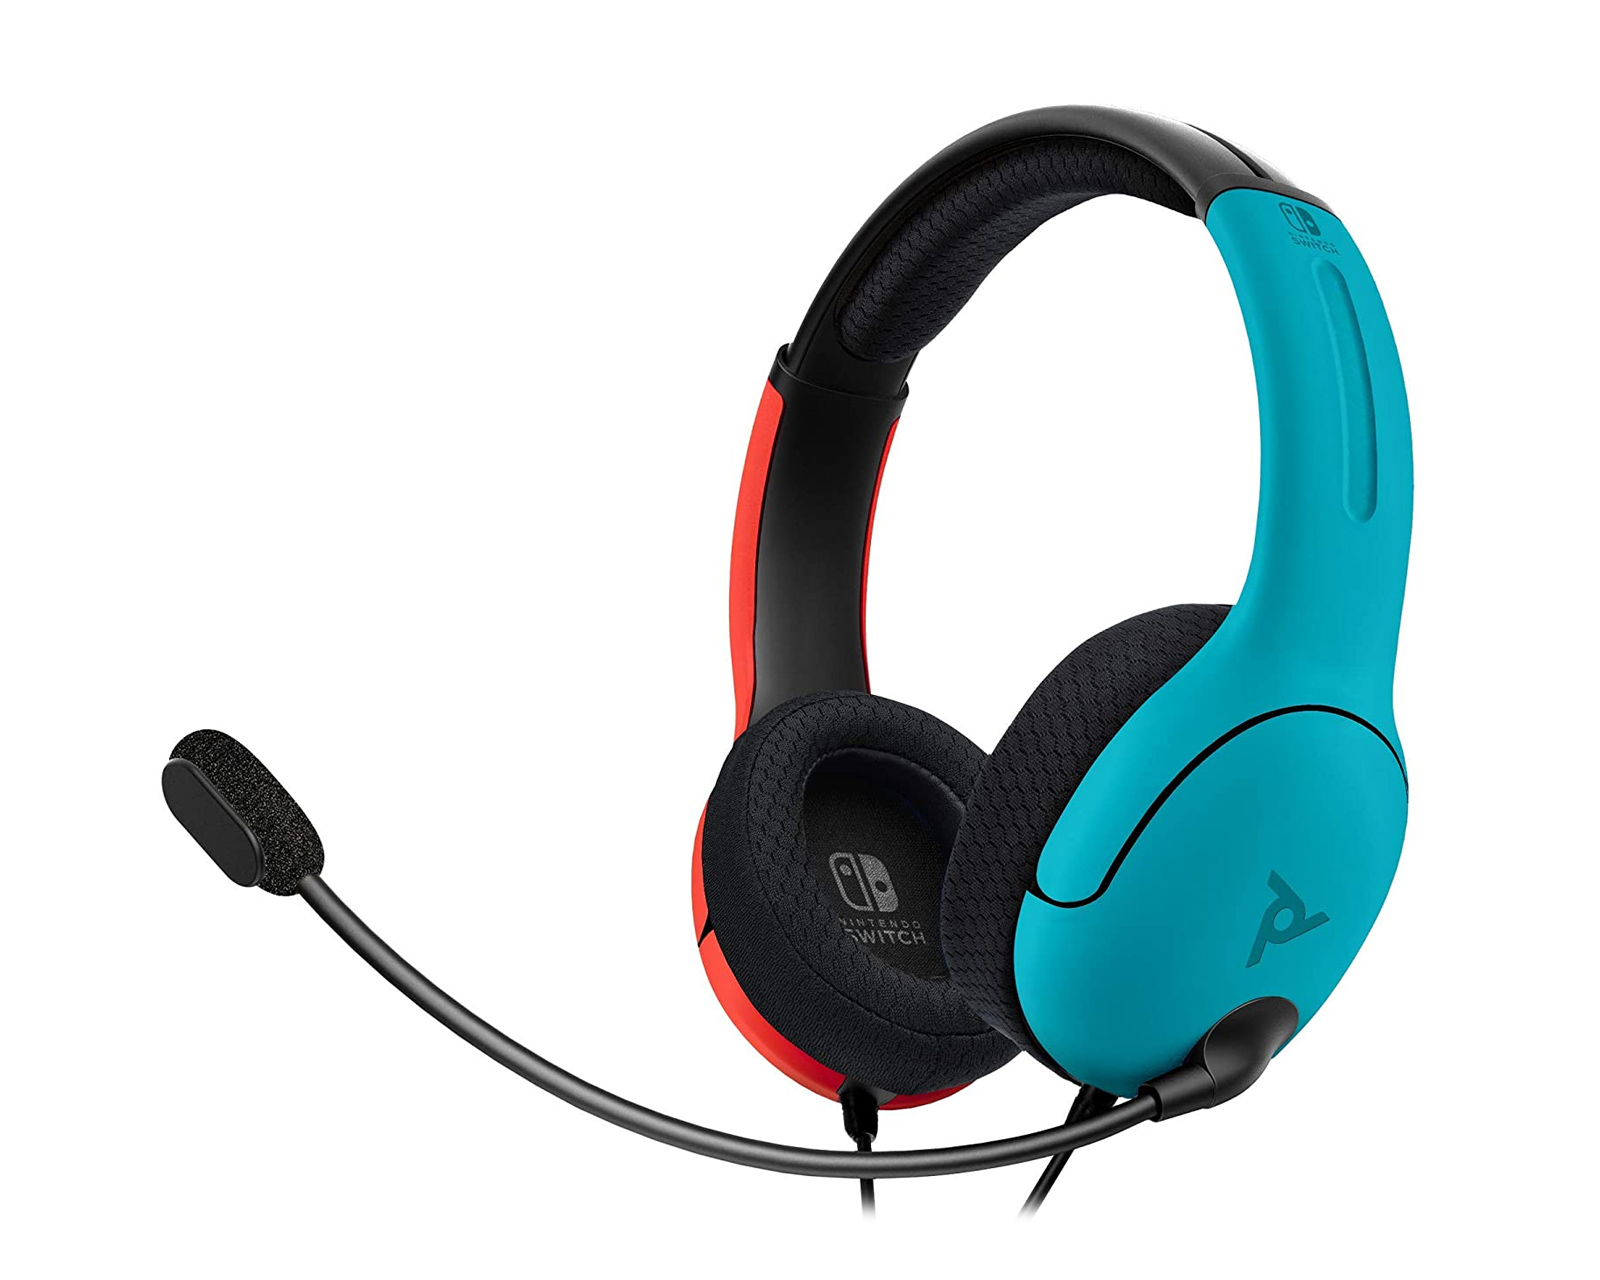 nintendo switch lvl40 wired stereo headset